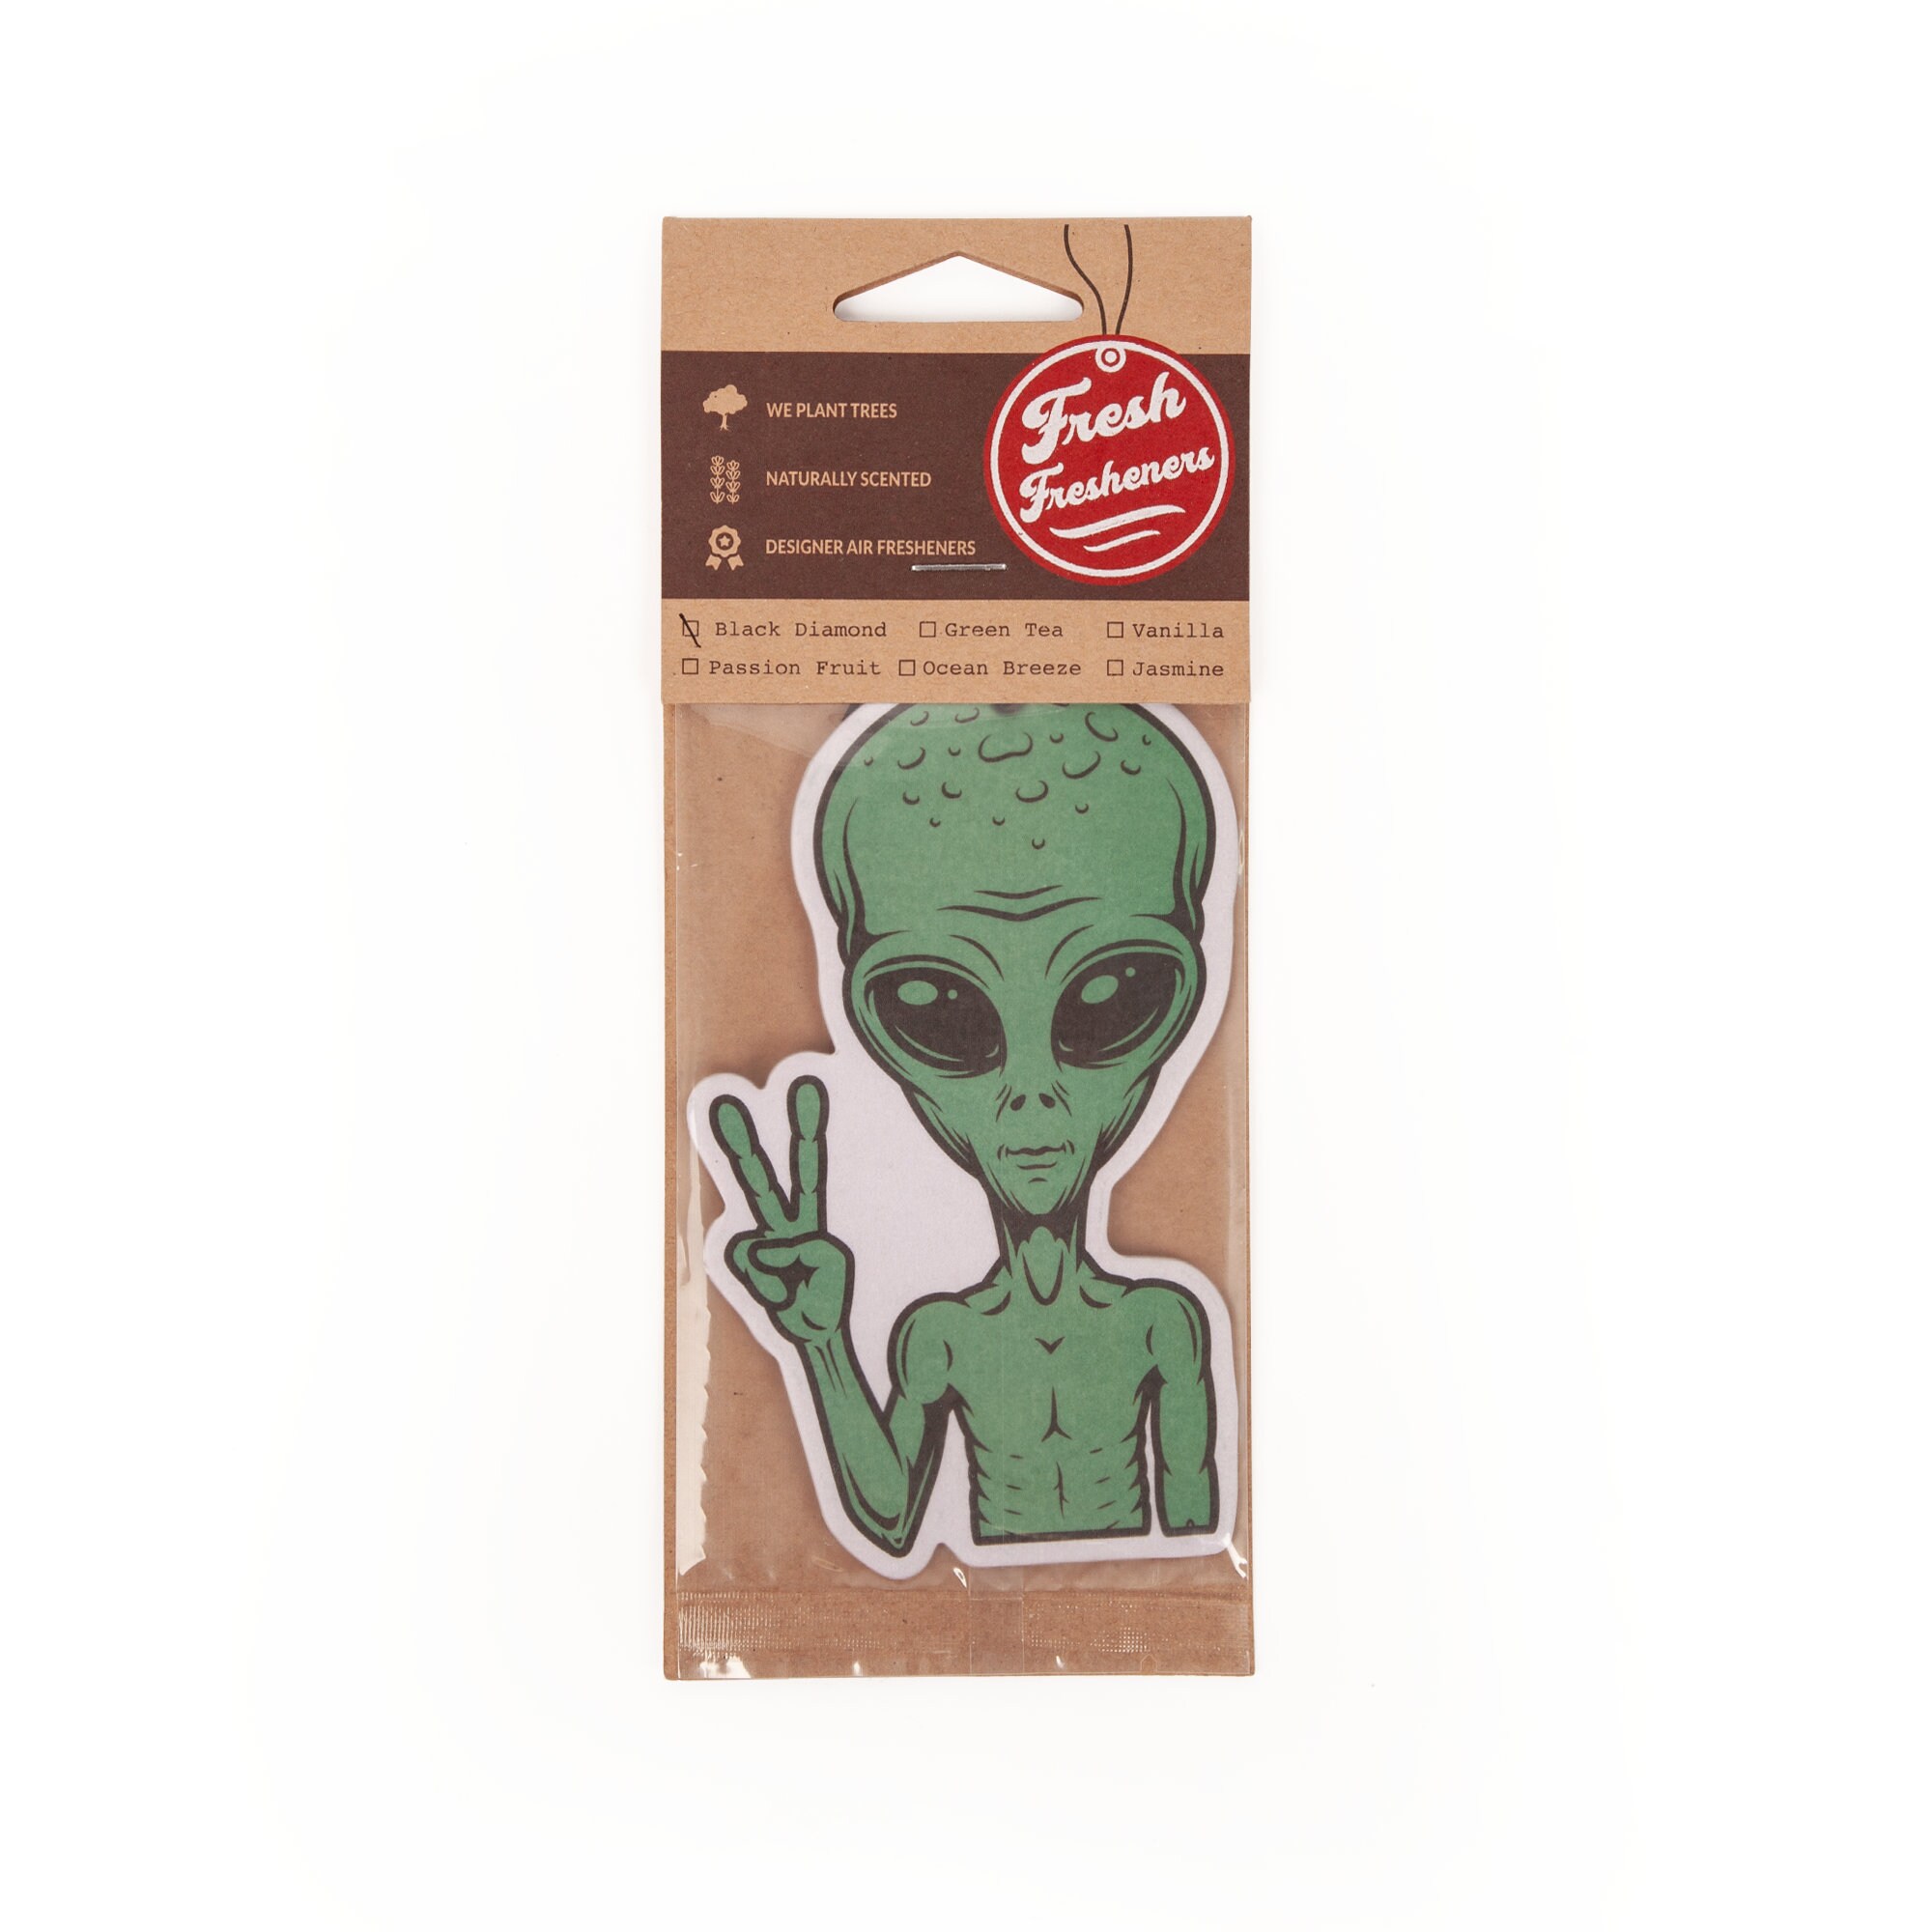 Alien Car Air Freshener for Women | Perfume Style Car Scents Air Freshener with Vent Clip | Strong Car Perfume Air Freshener with Odour Eliminating